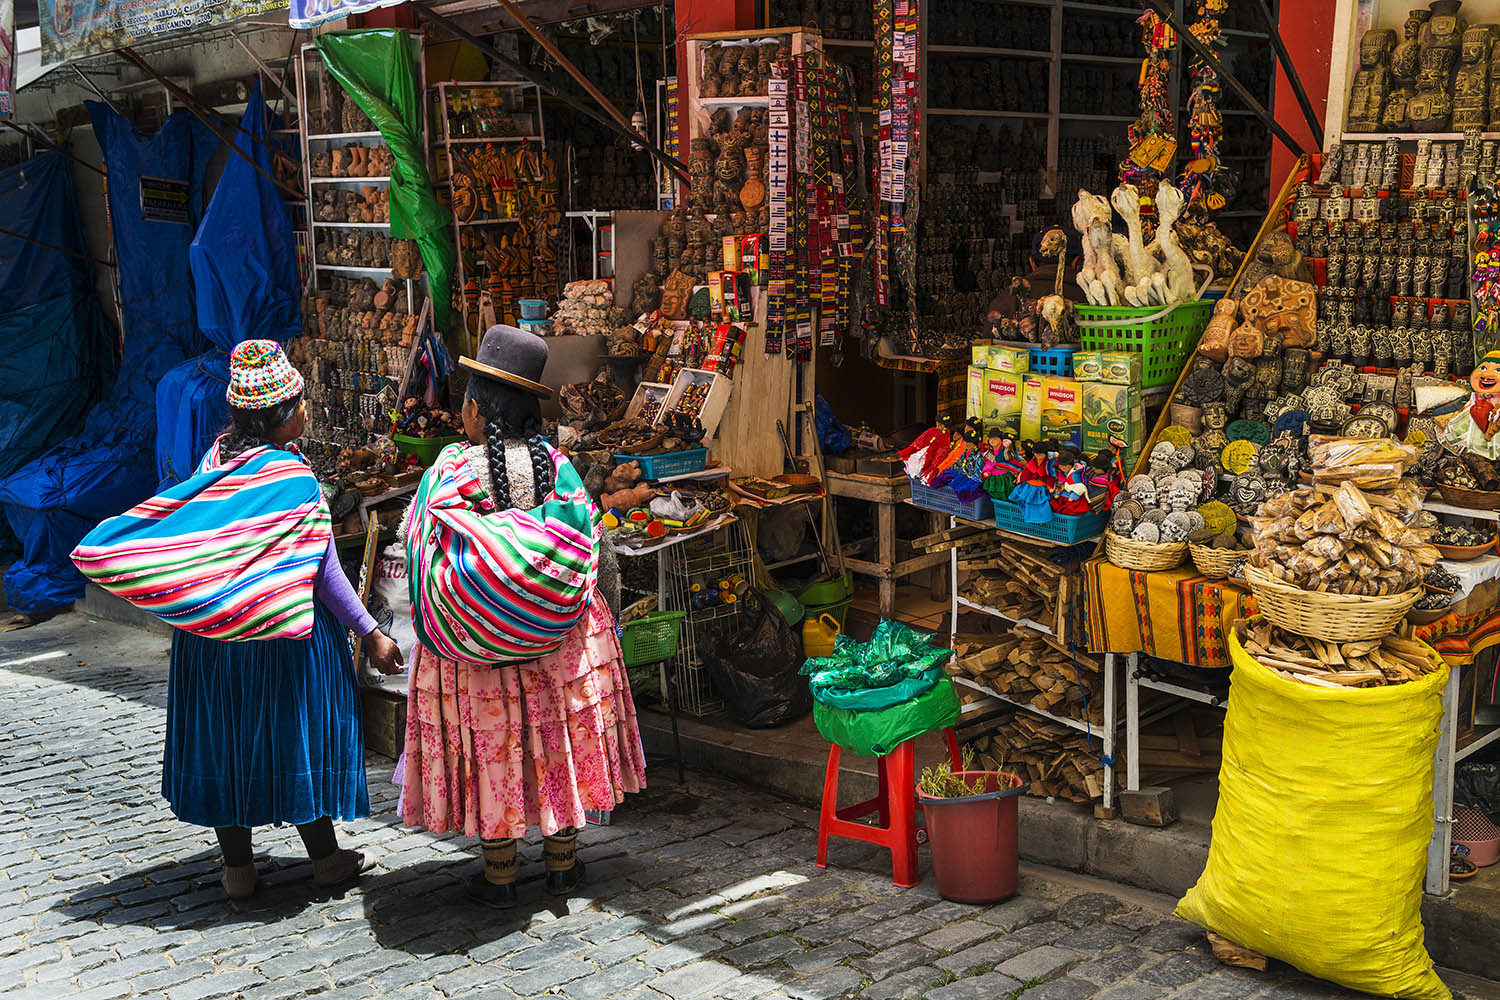 La Paz, Bolivia - December 8, 2013: Two local woman wearing traditional clothing in front of a store in a street of the city of La Paz, in Bolivia